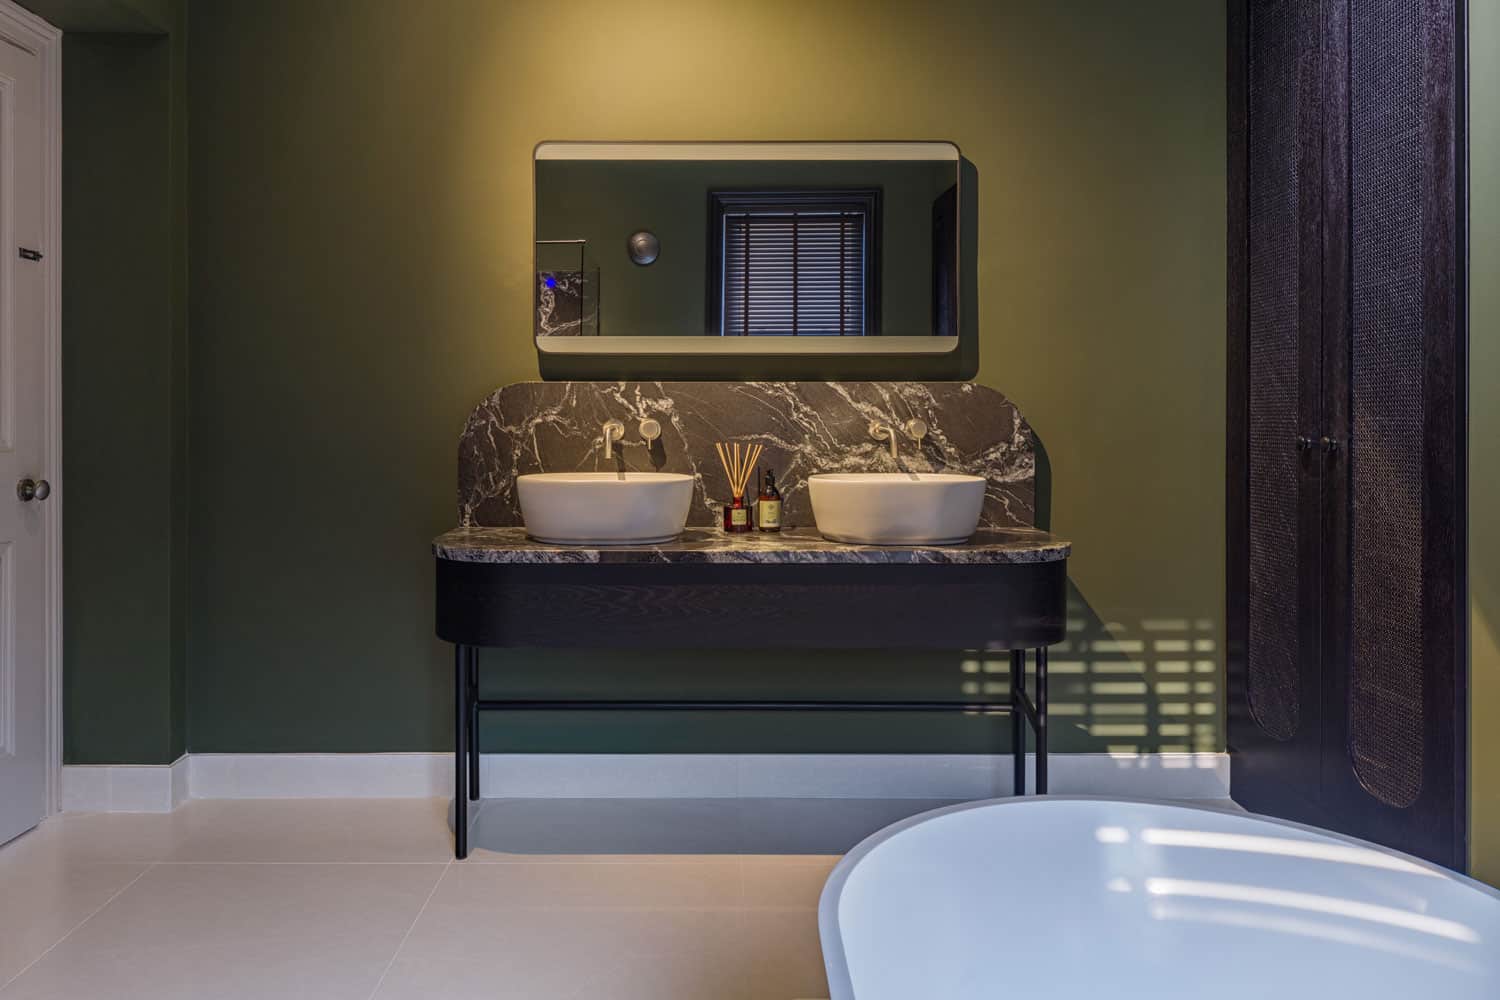 Image 26 of Luxury Bathroom 7 1 in Sensa helps to recreate the sensations of a "spa" at home - Cosentino